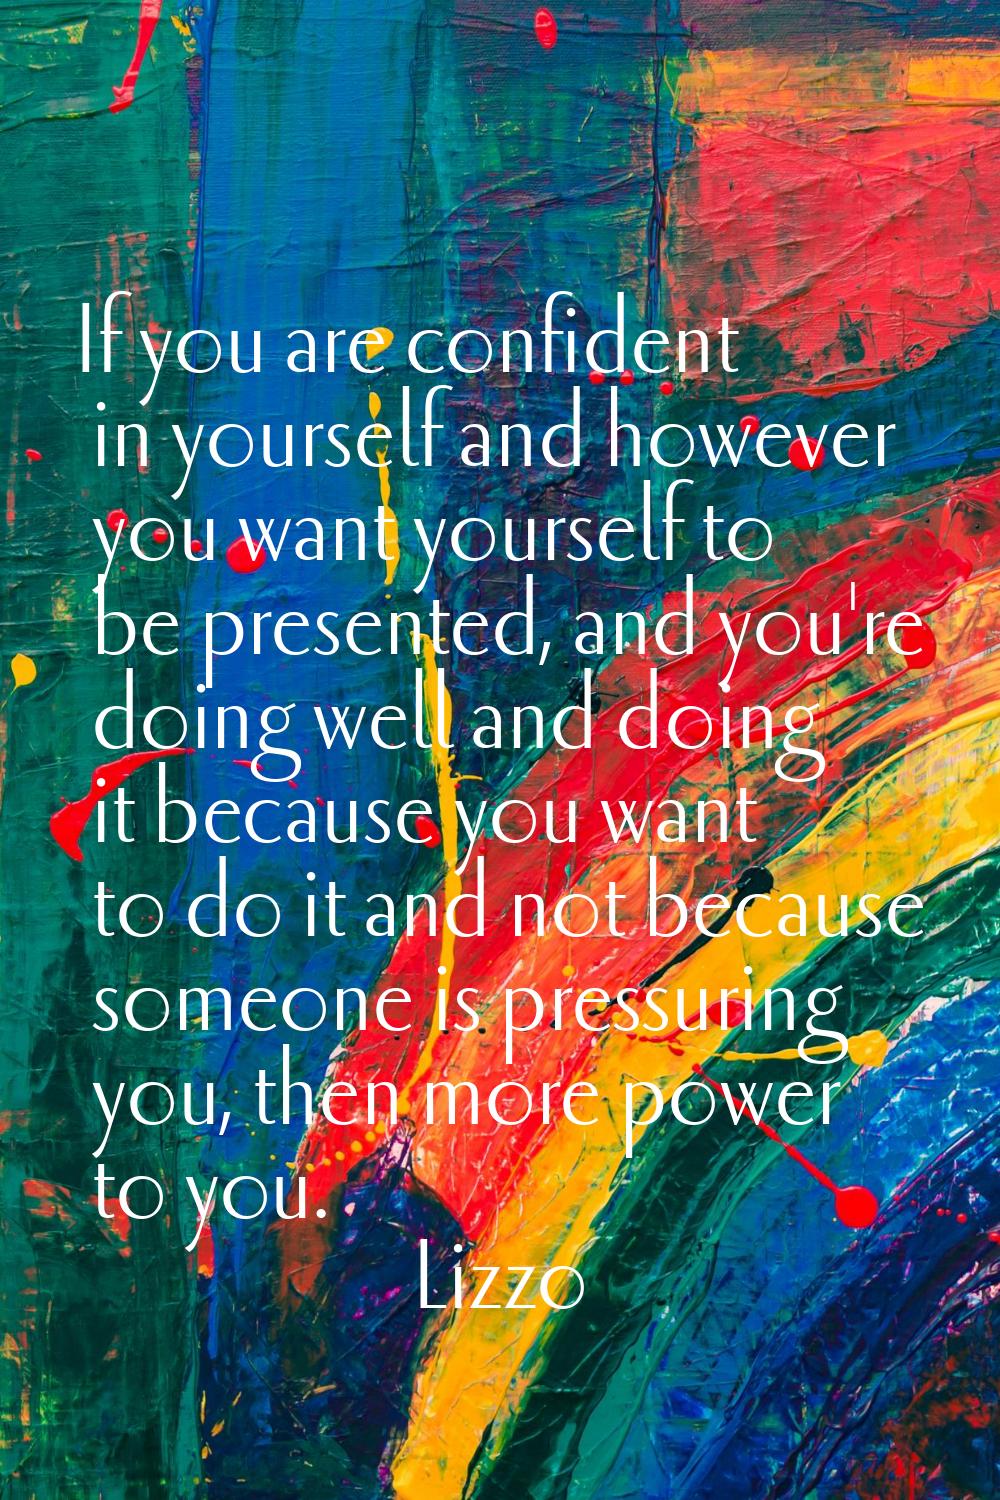 If you are confident in yourself and however you want yourself to be presented, and you're doing we